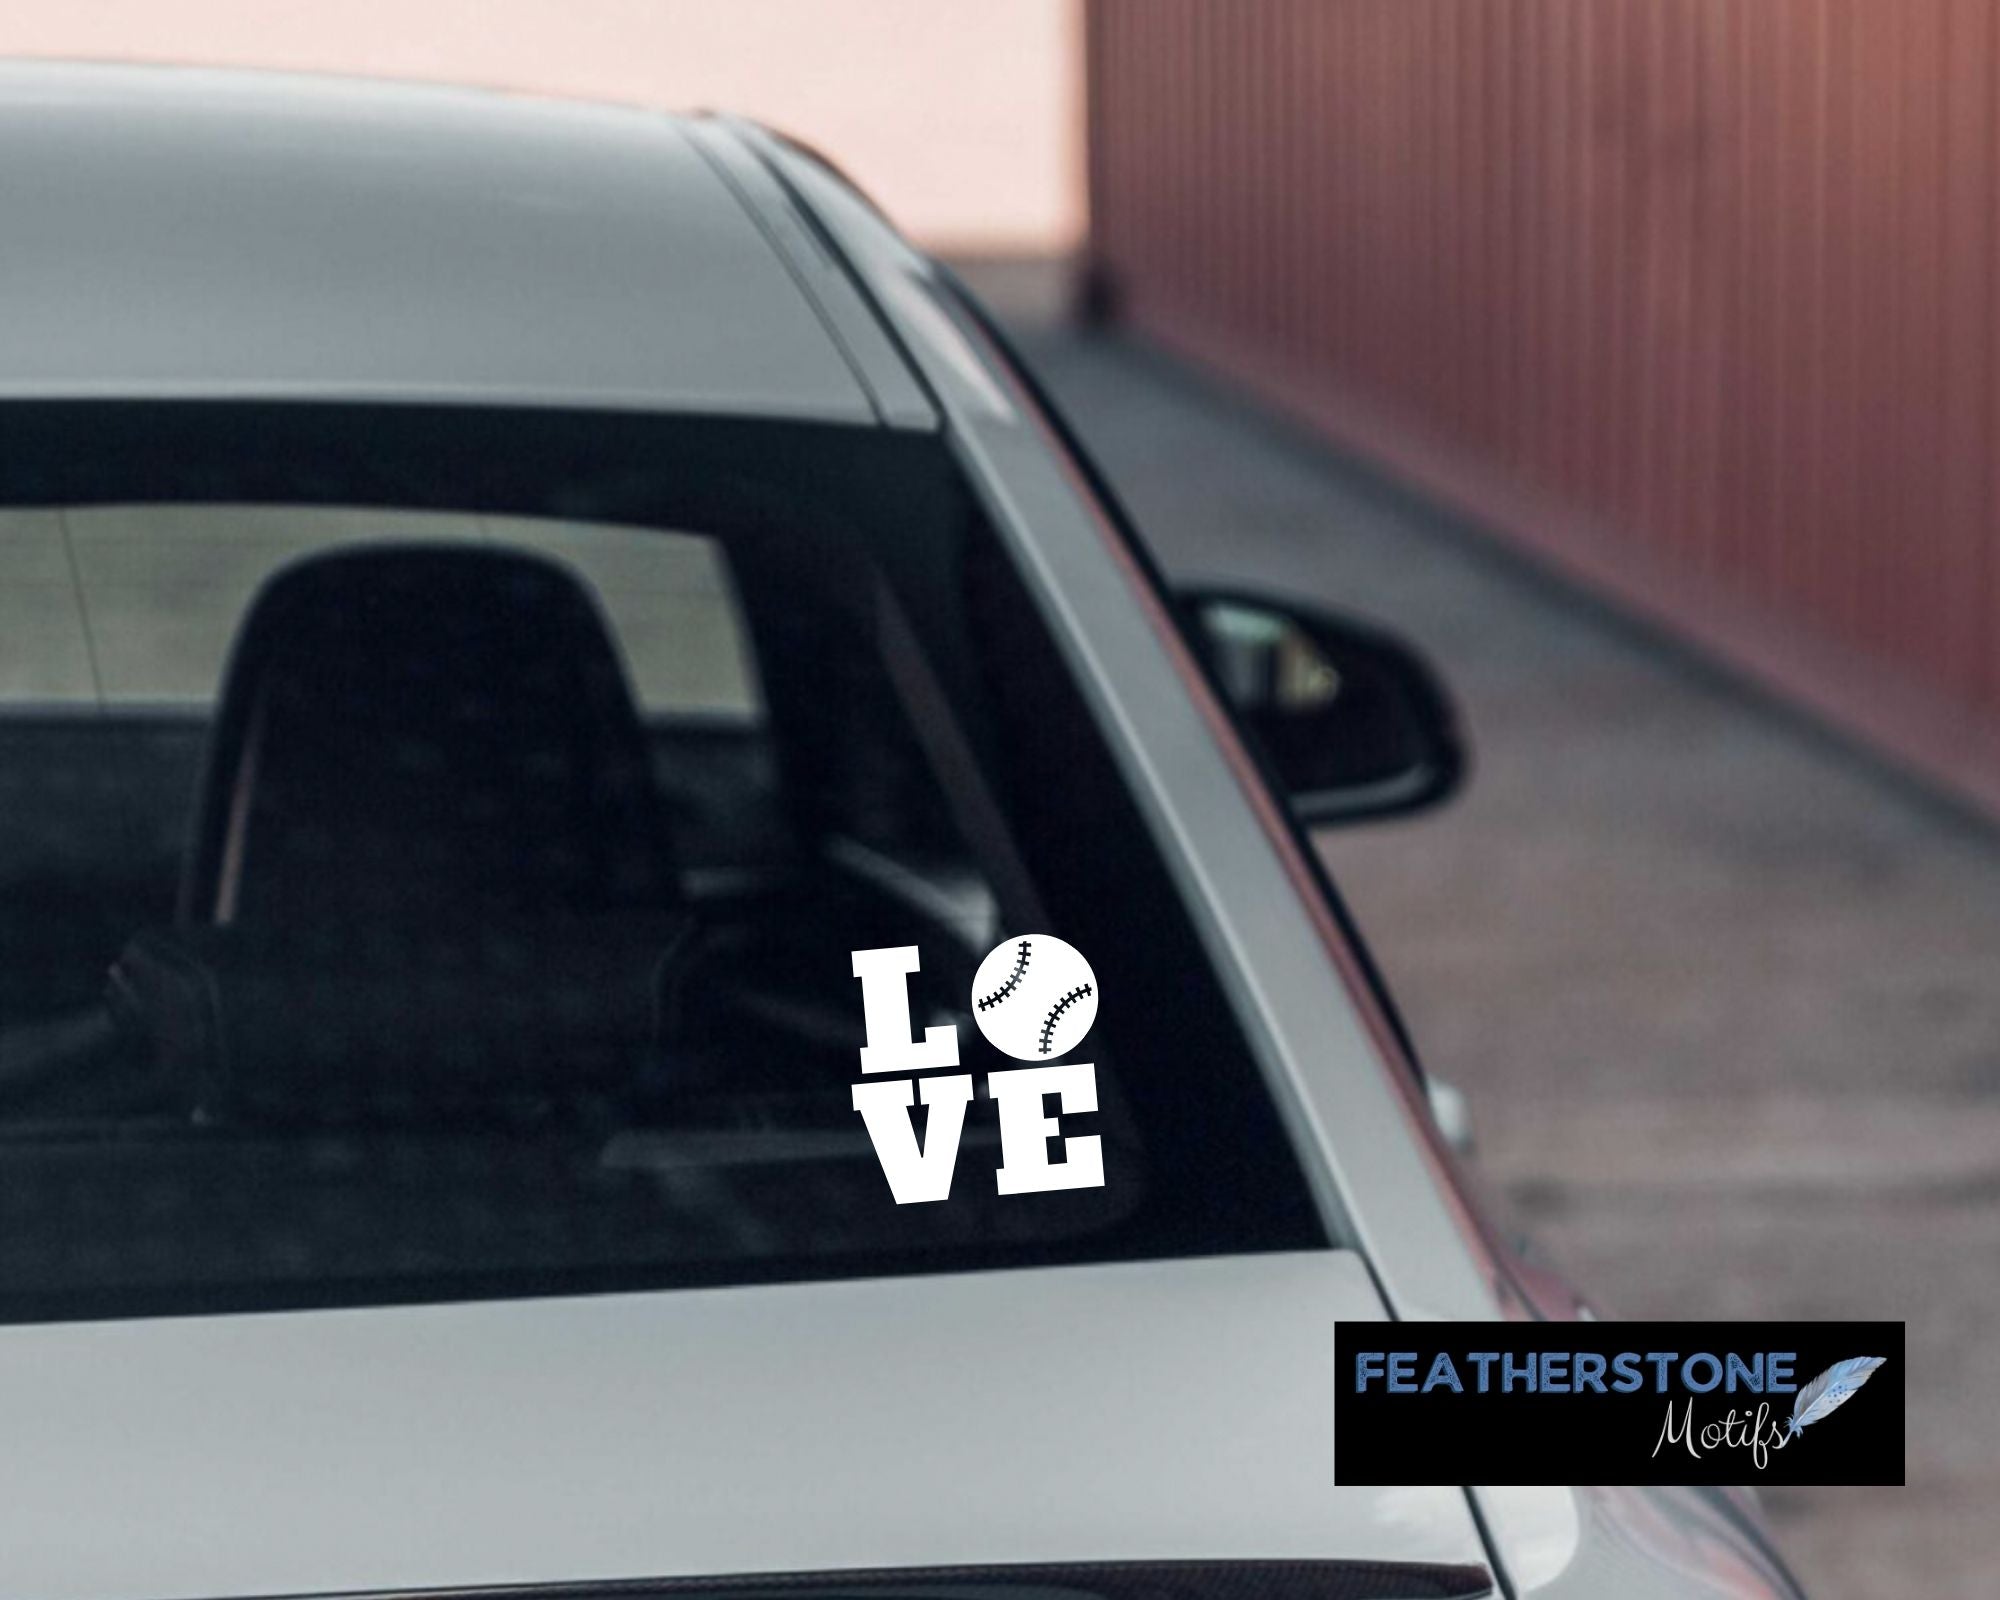 Love baseball? Then show it with this baseball love square vinyl decal! Available in 4 sizes and 10 colors, these vinyl decals make great gifts for everyone. This image shows the baseball love square decal on the back window of a car. 